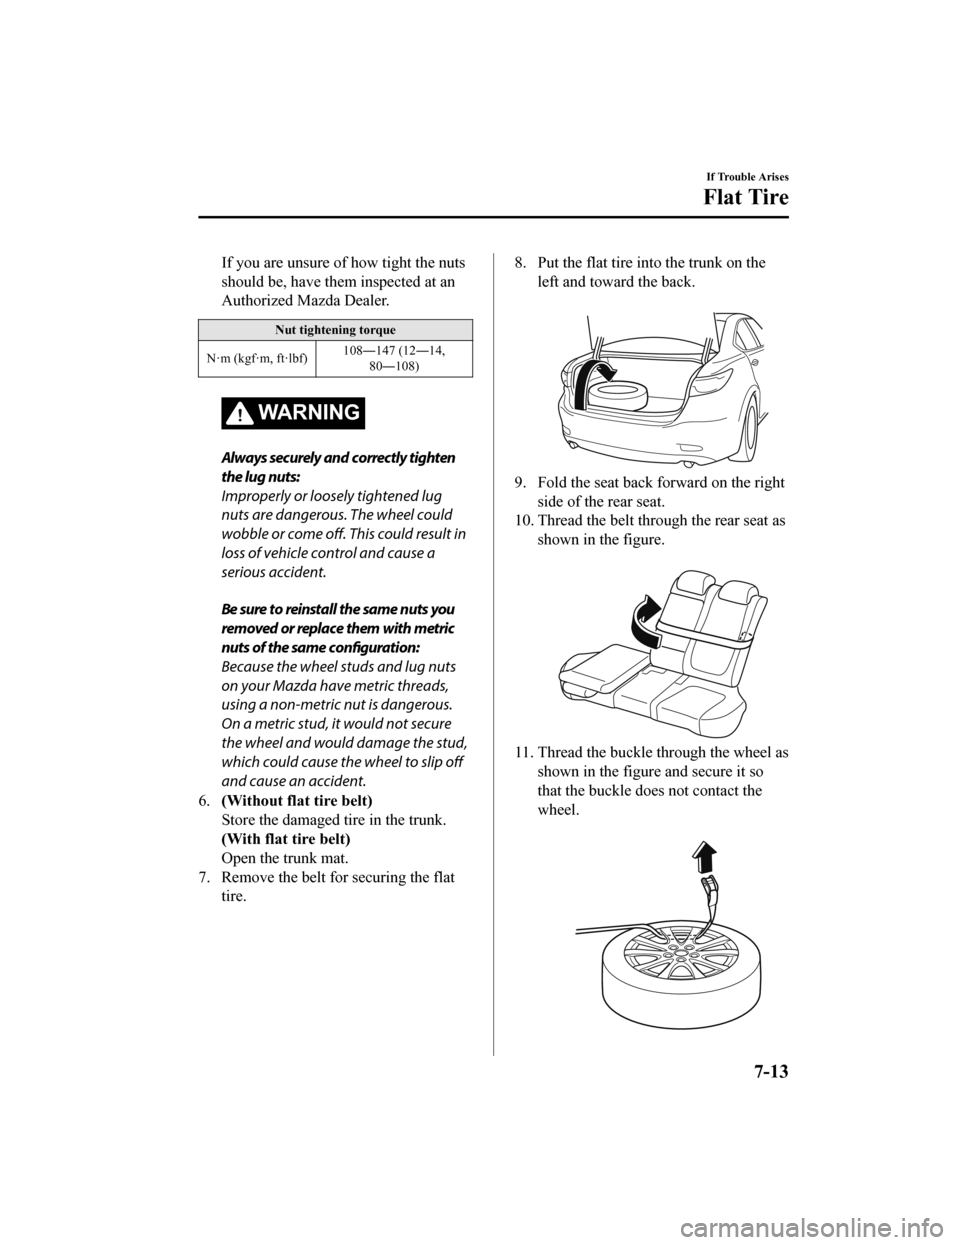 MAZDA MODEL 6 2020  Owners Manual (in English) If you are unsure of how tight the nuts
should be, have them inspected at an
Authorized Mazda Dealer.
Nut tightening torque
N·m (kgf·m, ft·lbf) 108―147 (12―14,
80―108)
WA R N I N G
Always sec